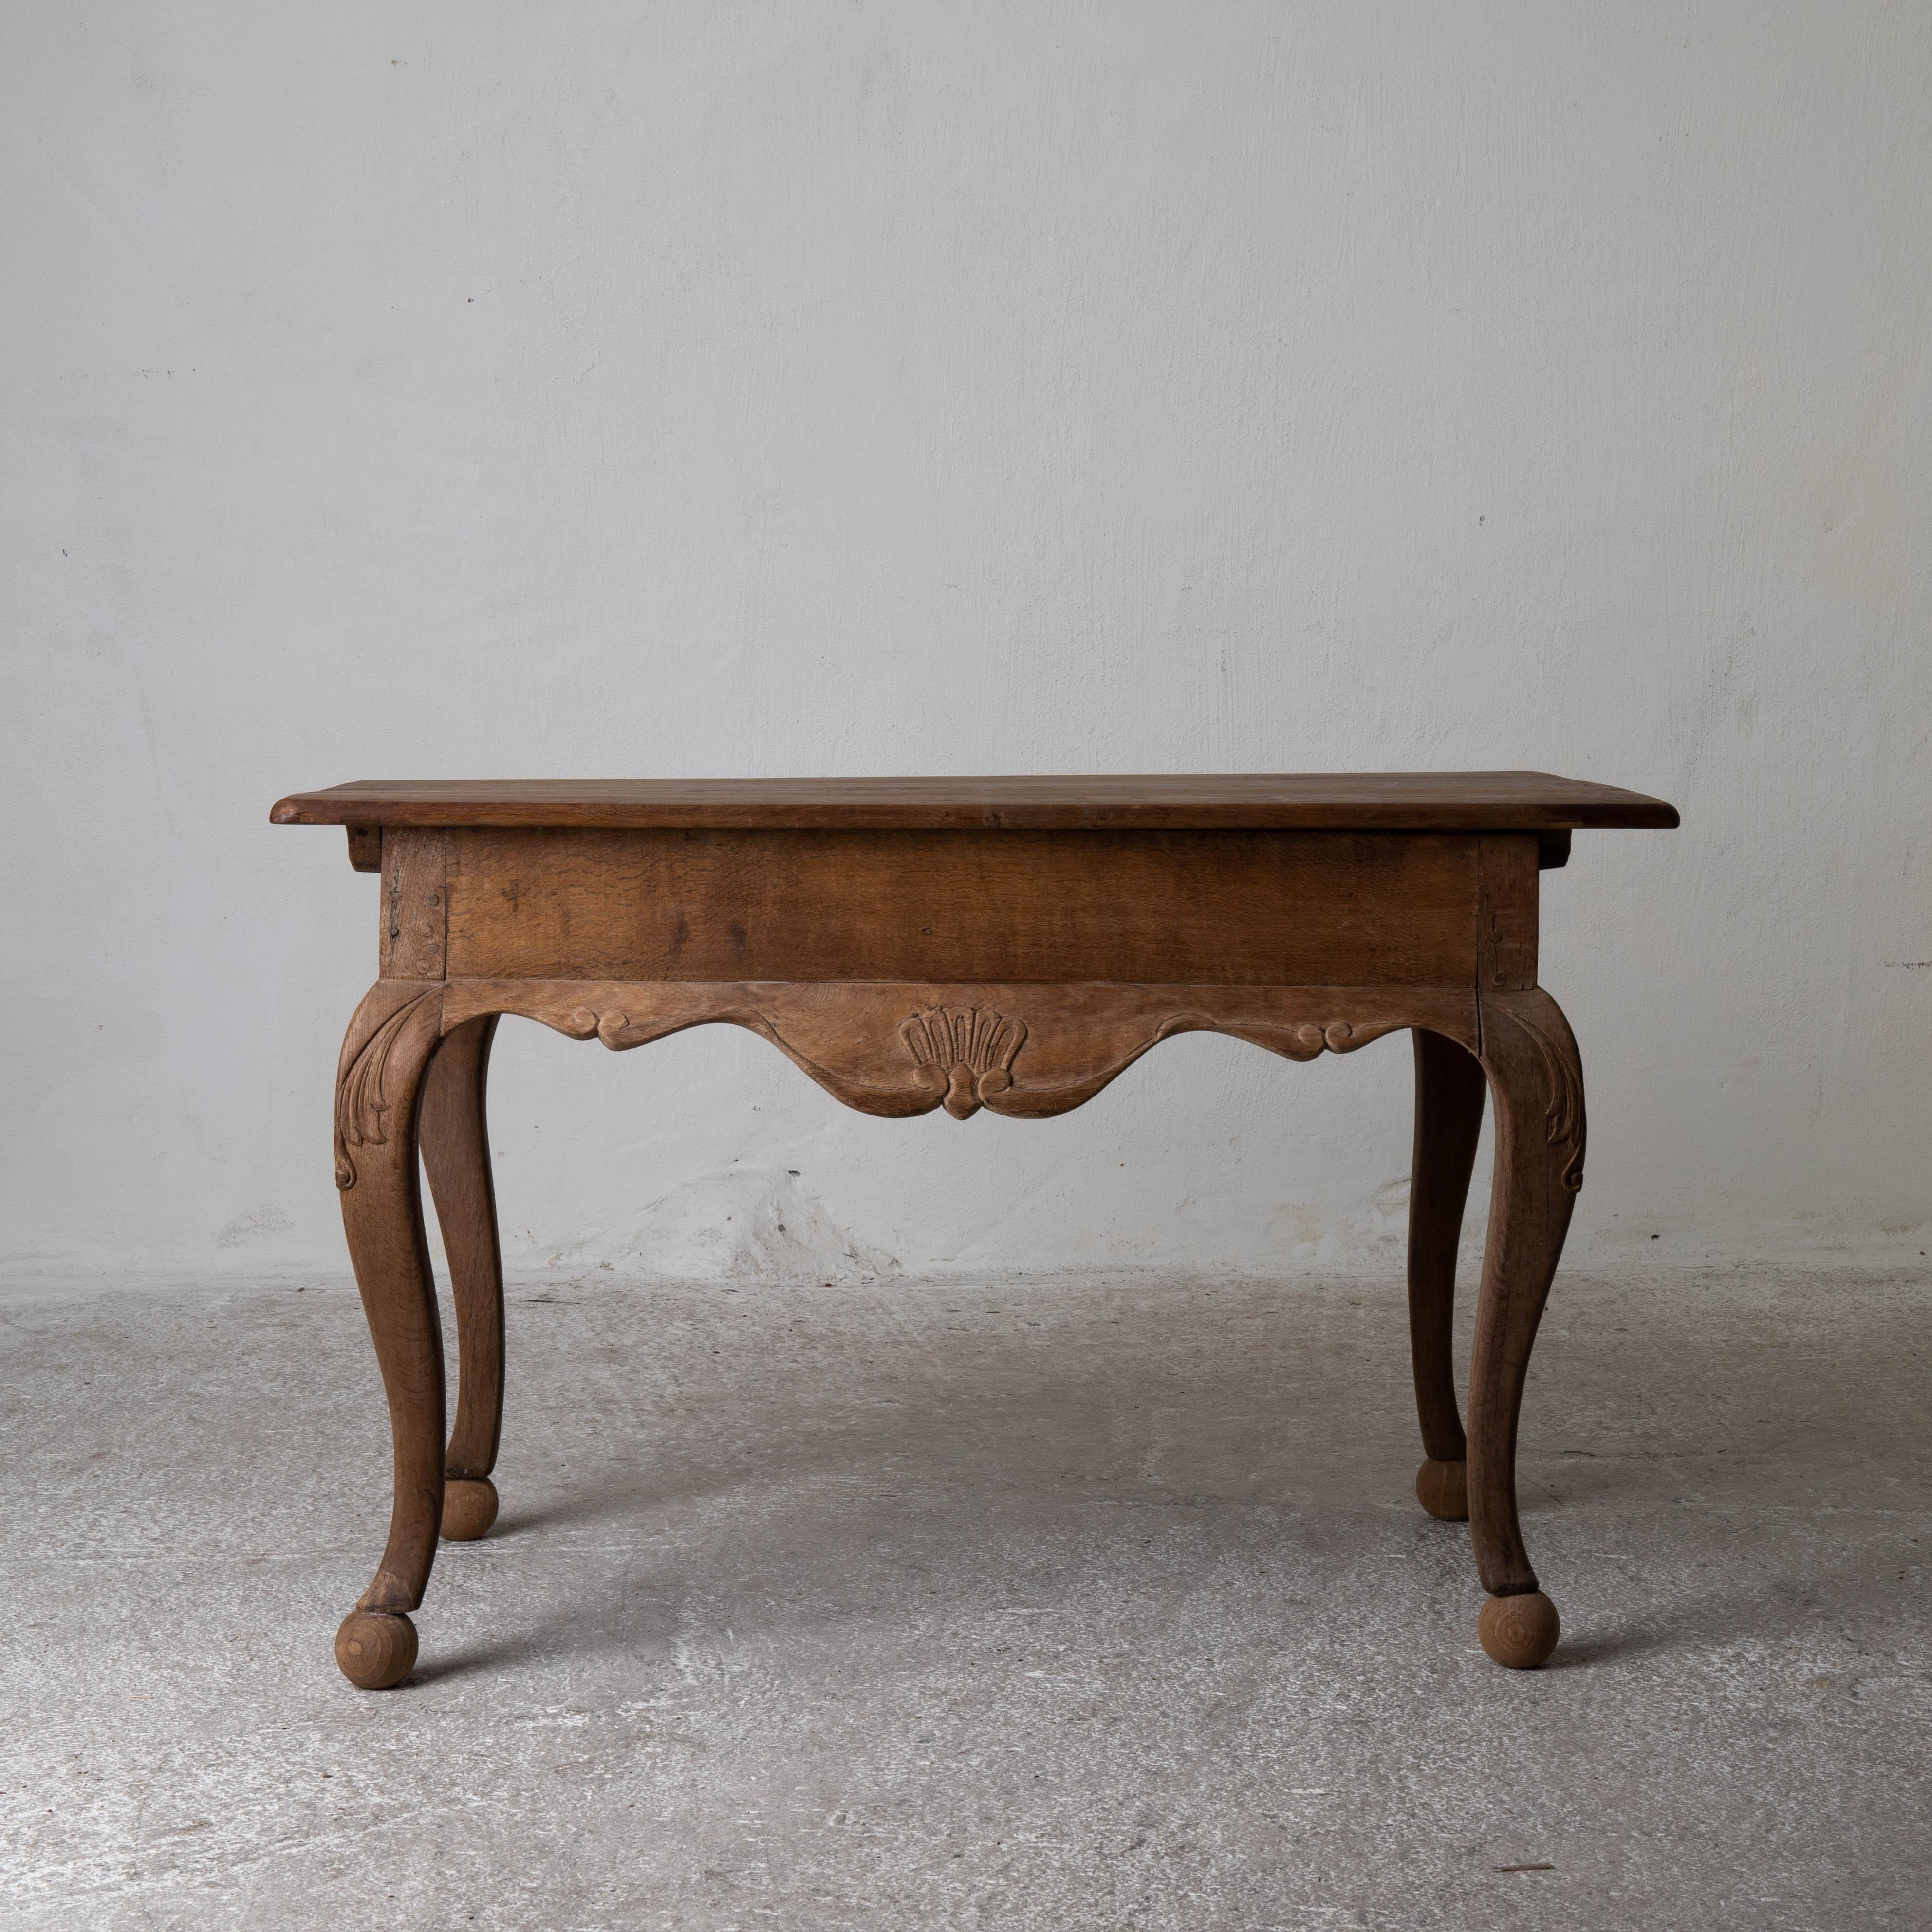 Table Swedish Rococo Period 1750-1775 Raw Finish Sweden. A table made during the Rococo period 1750-1775 in Sweden. A raw finish. Decorated with shell shaped carvings, S shaped legs and ball (new) feet.